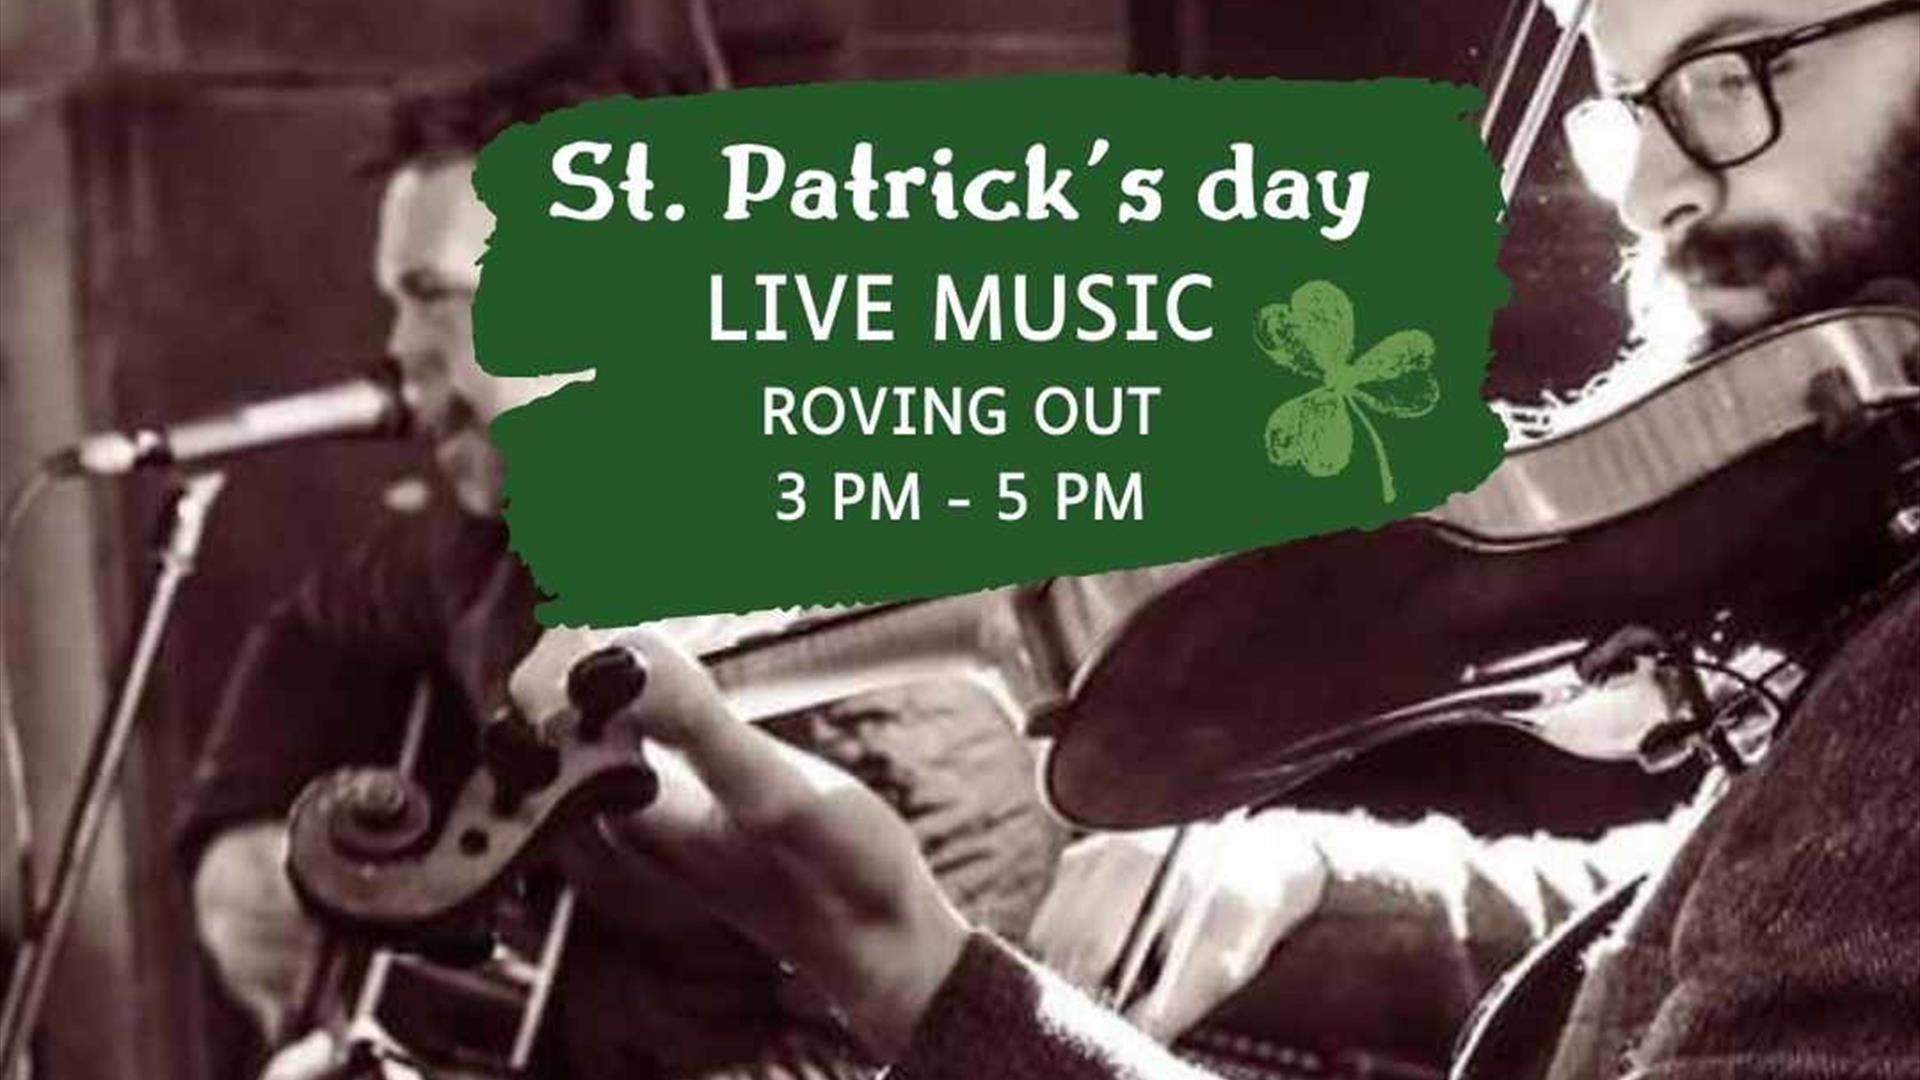 St Patrick's Day Live Music Poster, The Cuan